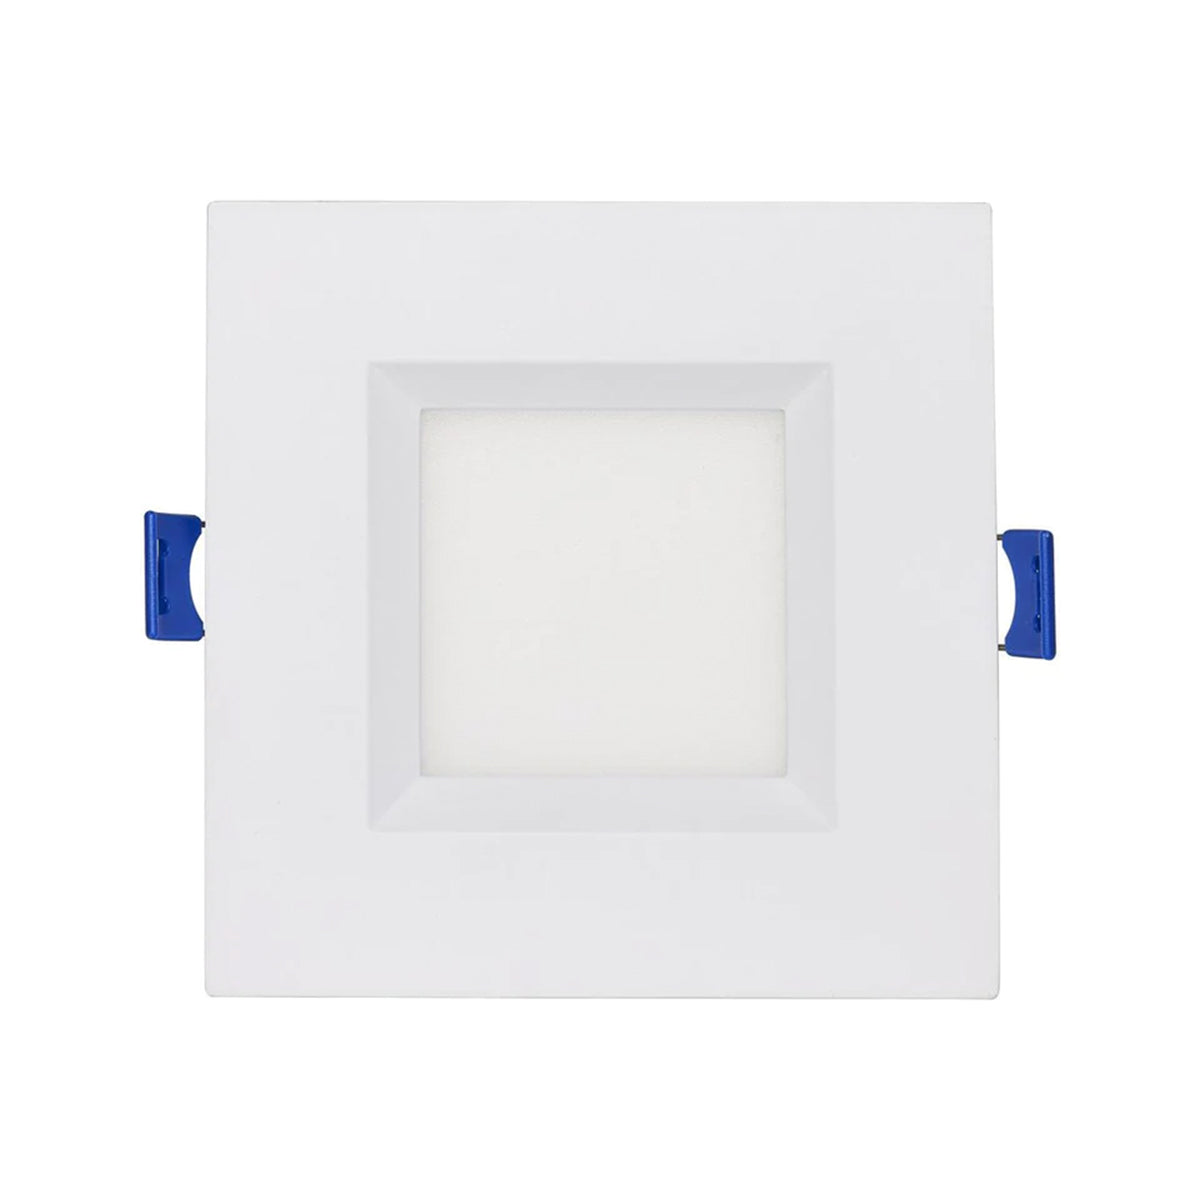 Satco Starfish, Smooth Baffle, 4 inch, Square Smart Canless LED Recessed Light, 9 Watt, 540 Lumens, Selectable CCT 2000K to 5000K RGB/Tunable White